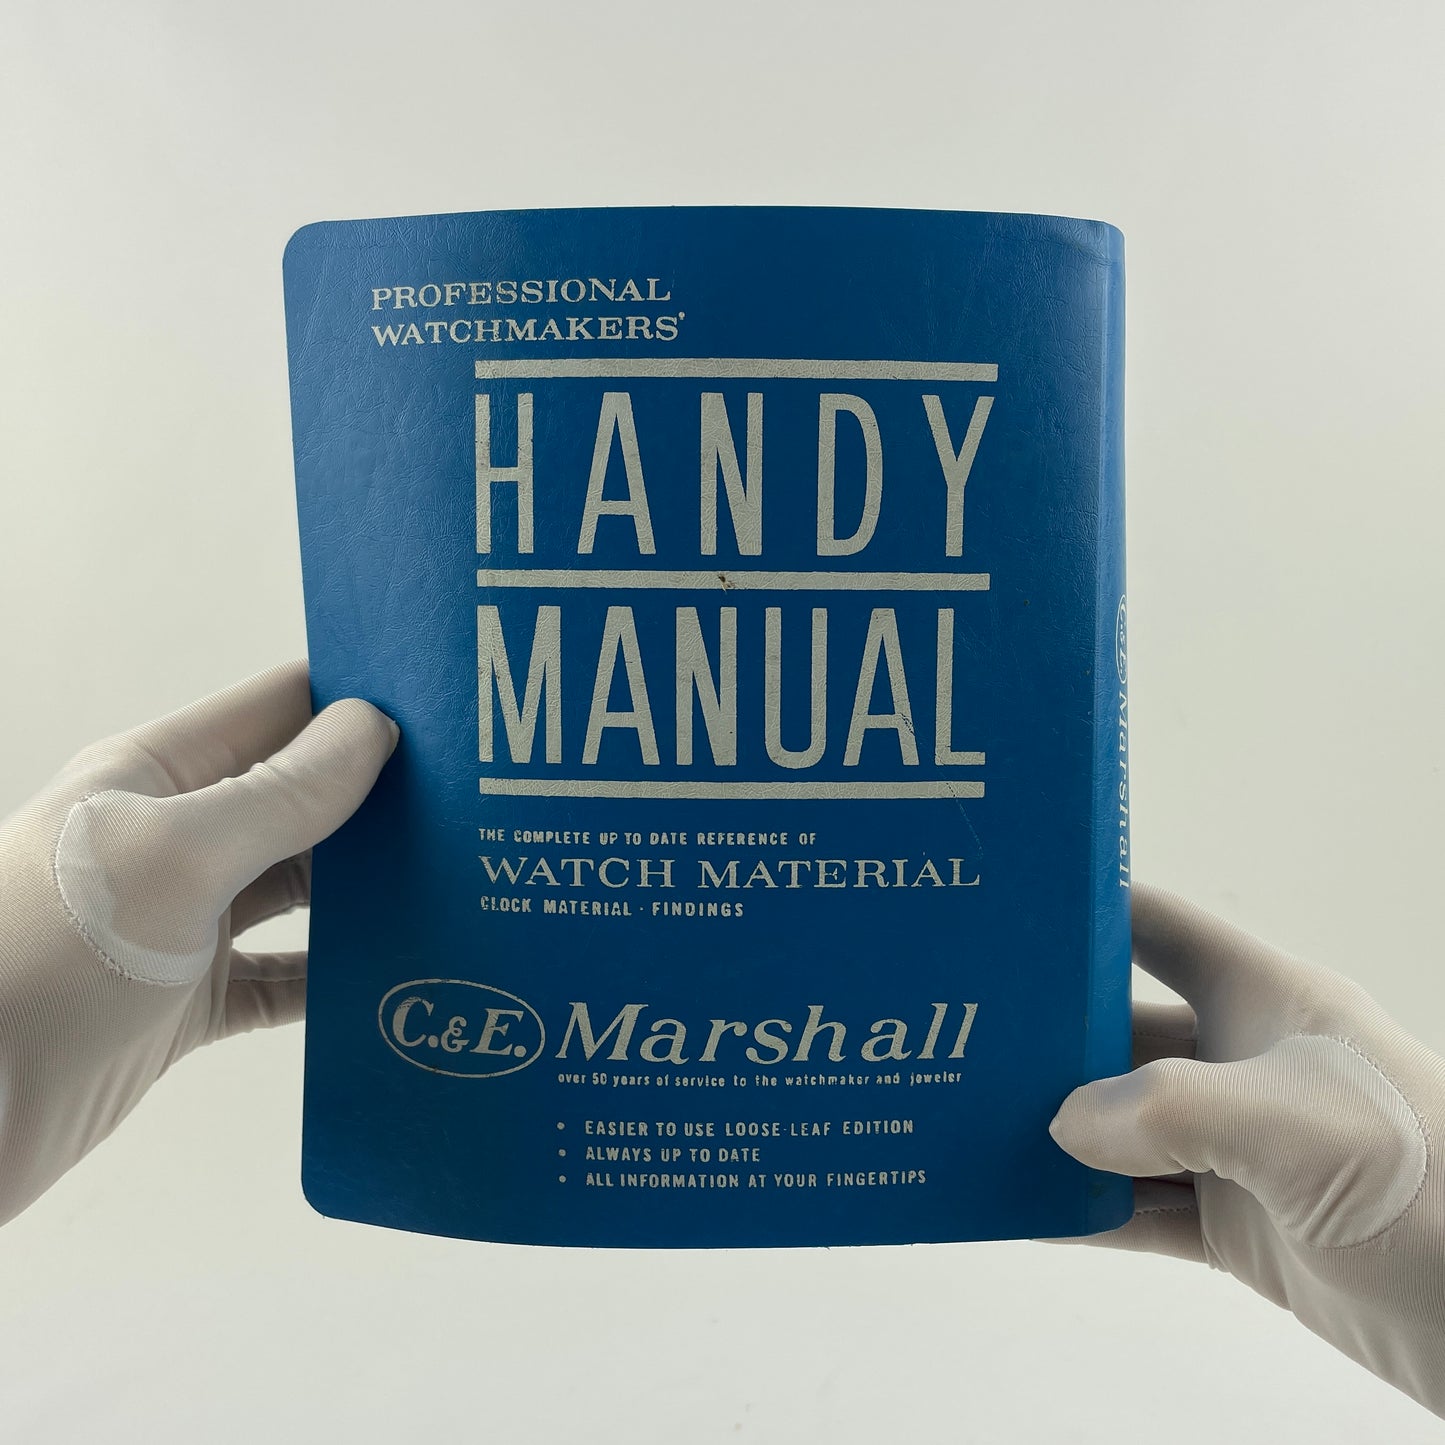 Lot 16- C&E Marshall Professional Watchmakers’ Handy Manual